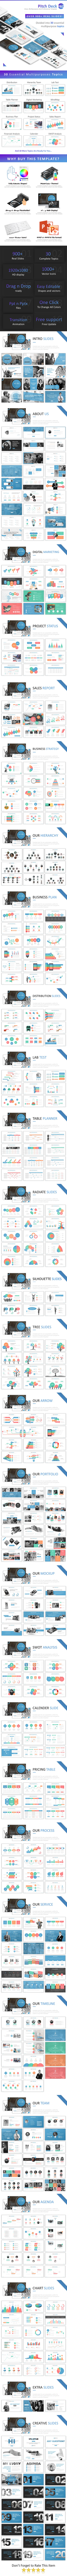 GraphicRiver Pitch Deck Pro Powerpoint 20818001